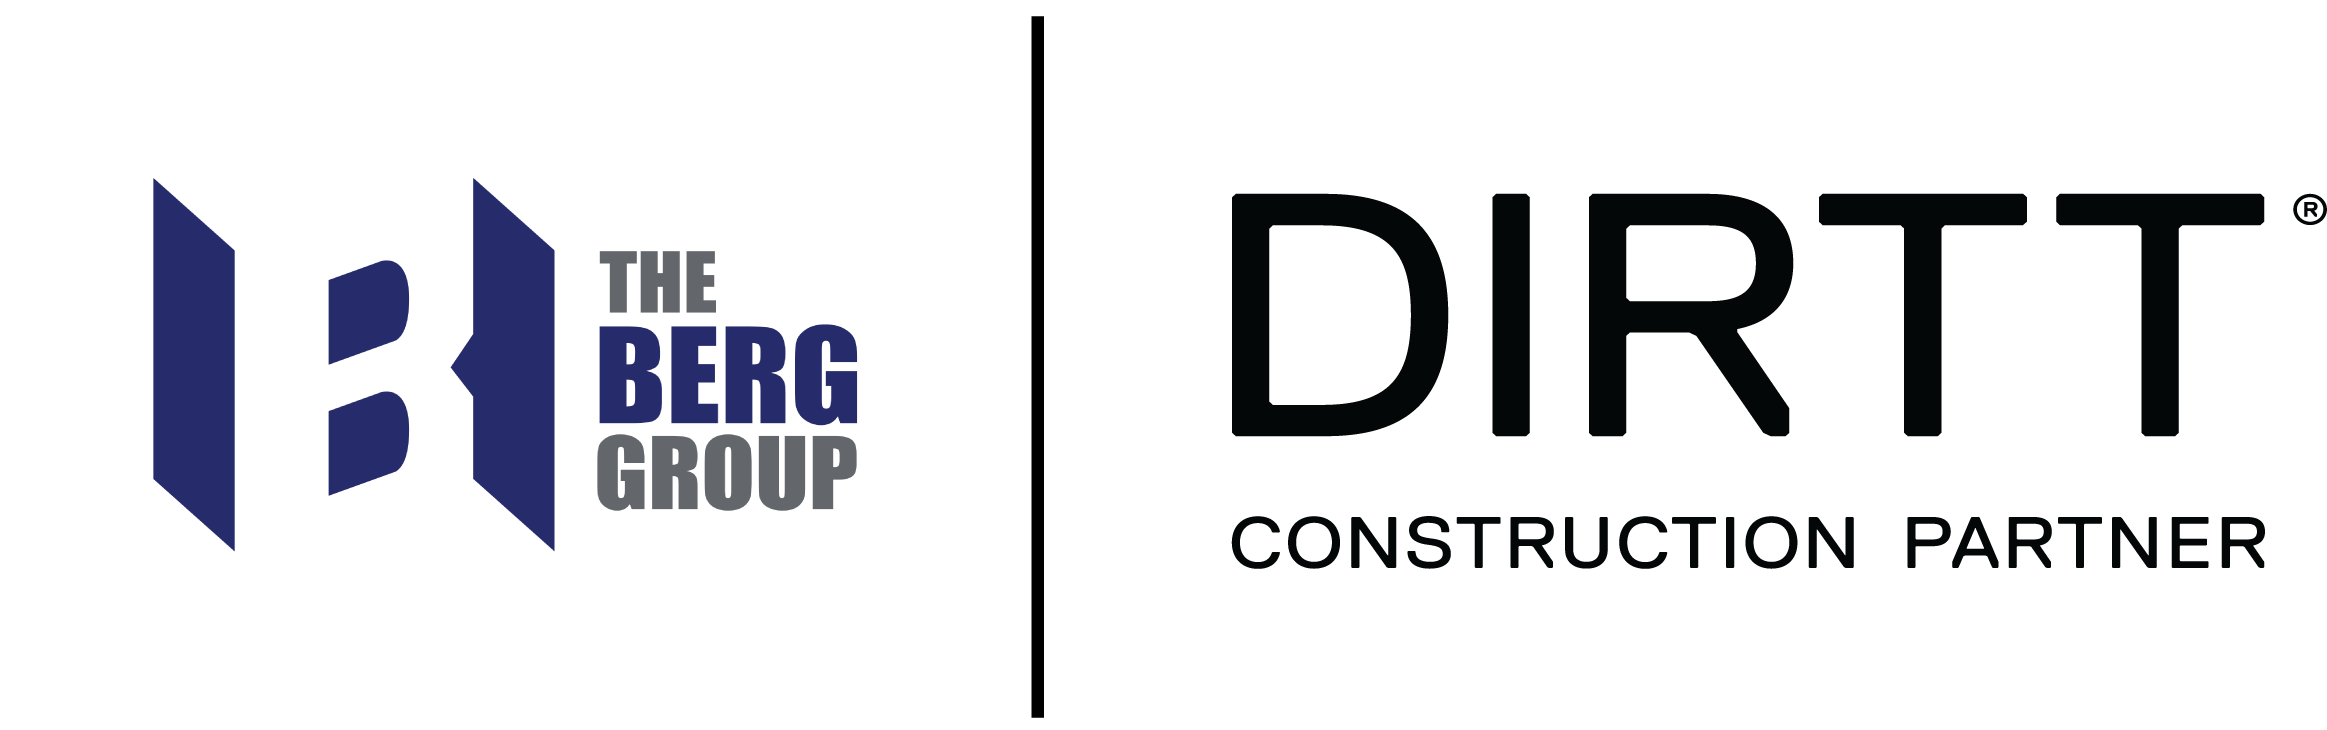 The Berg Group Announces Partnership with DIRTT Environmental Solutions in Northern California